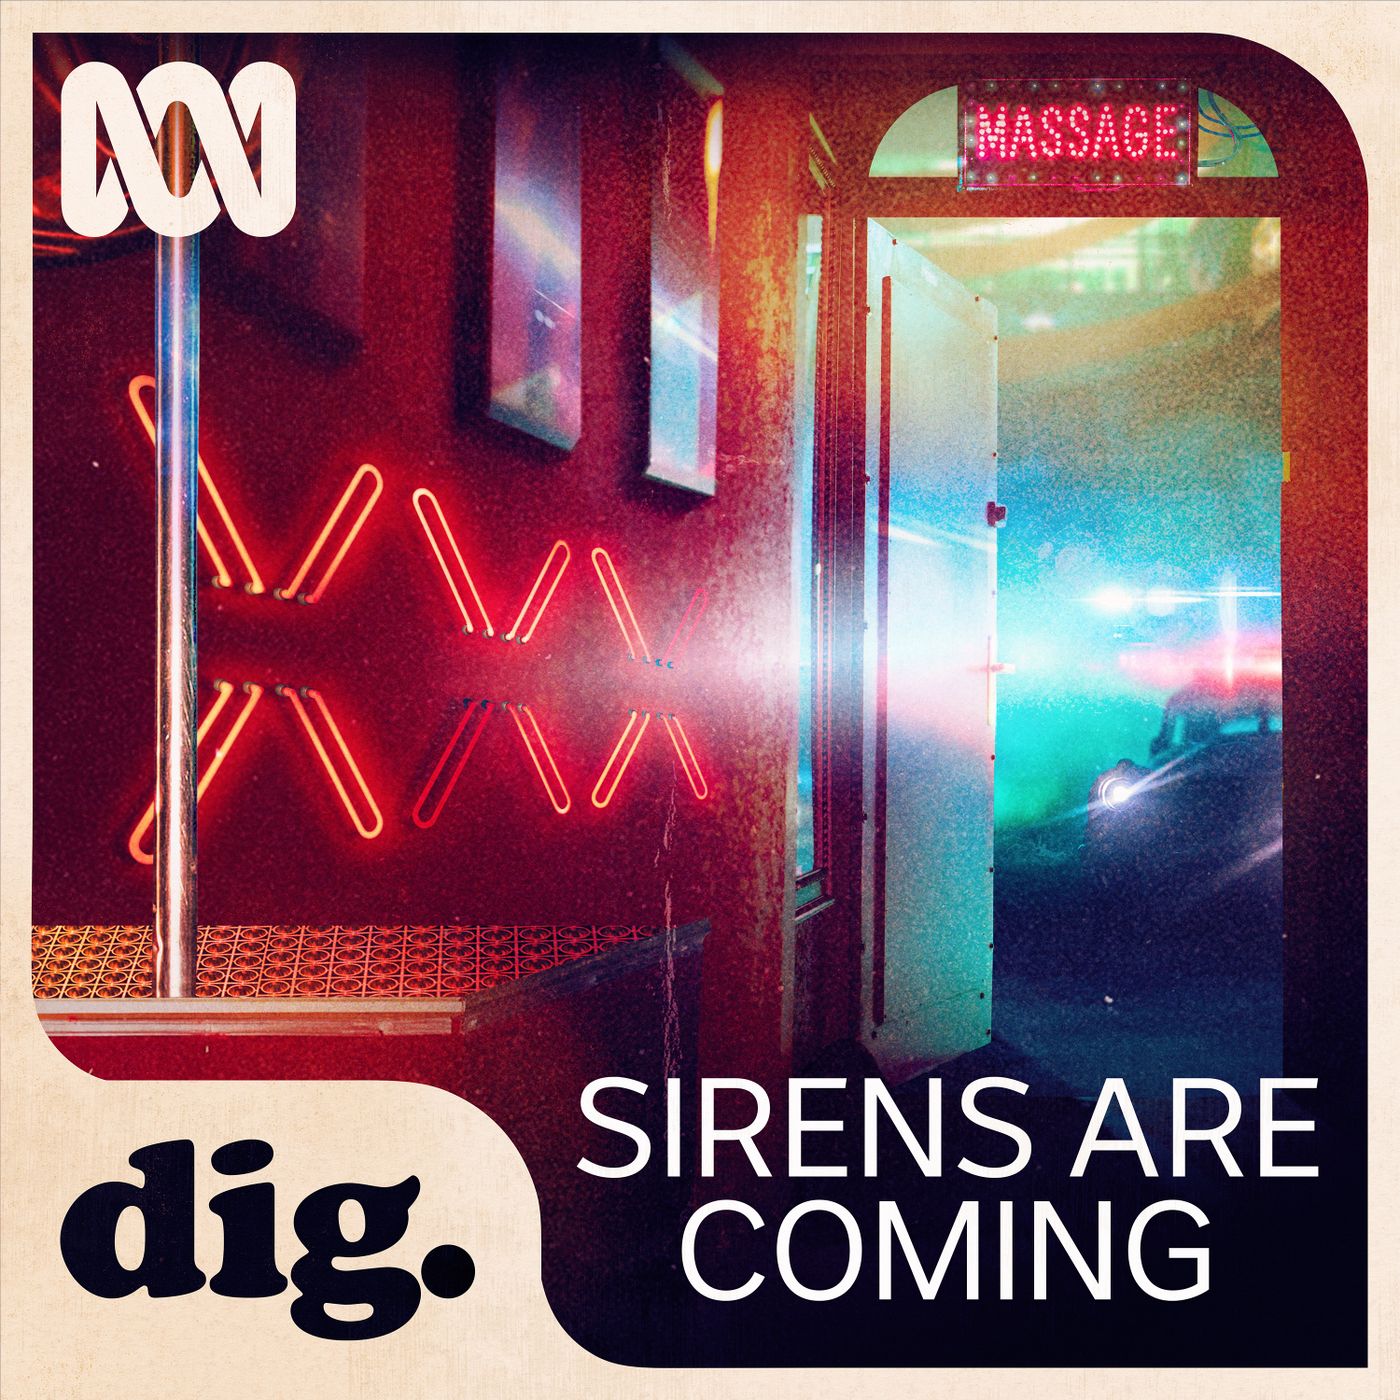 INTRODUCING - Dig: Sirens Are Coming